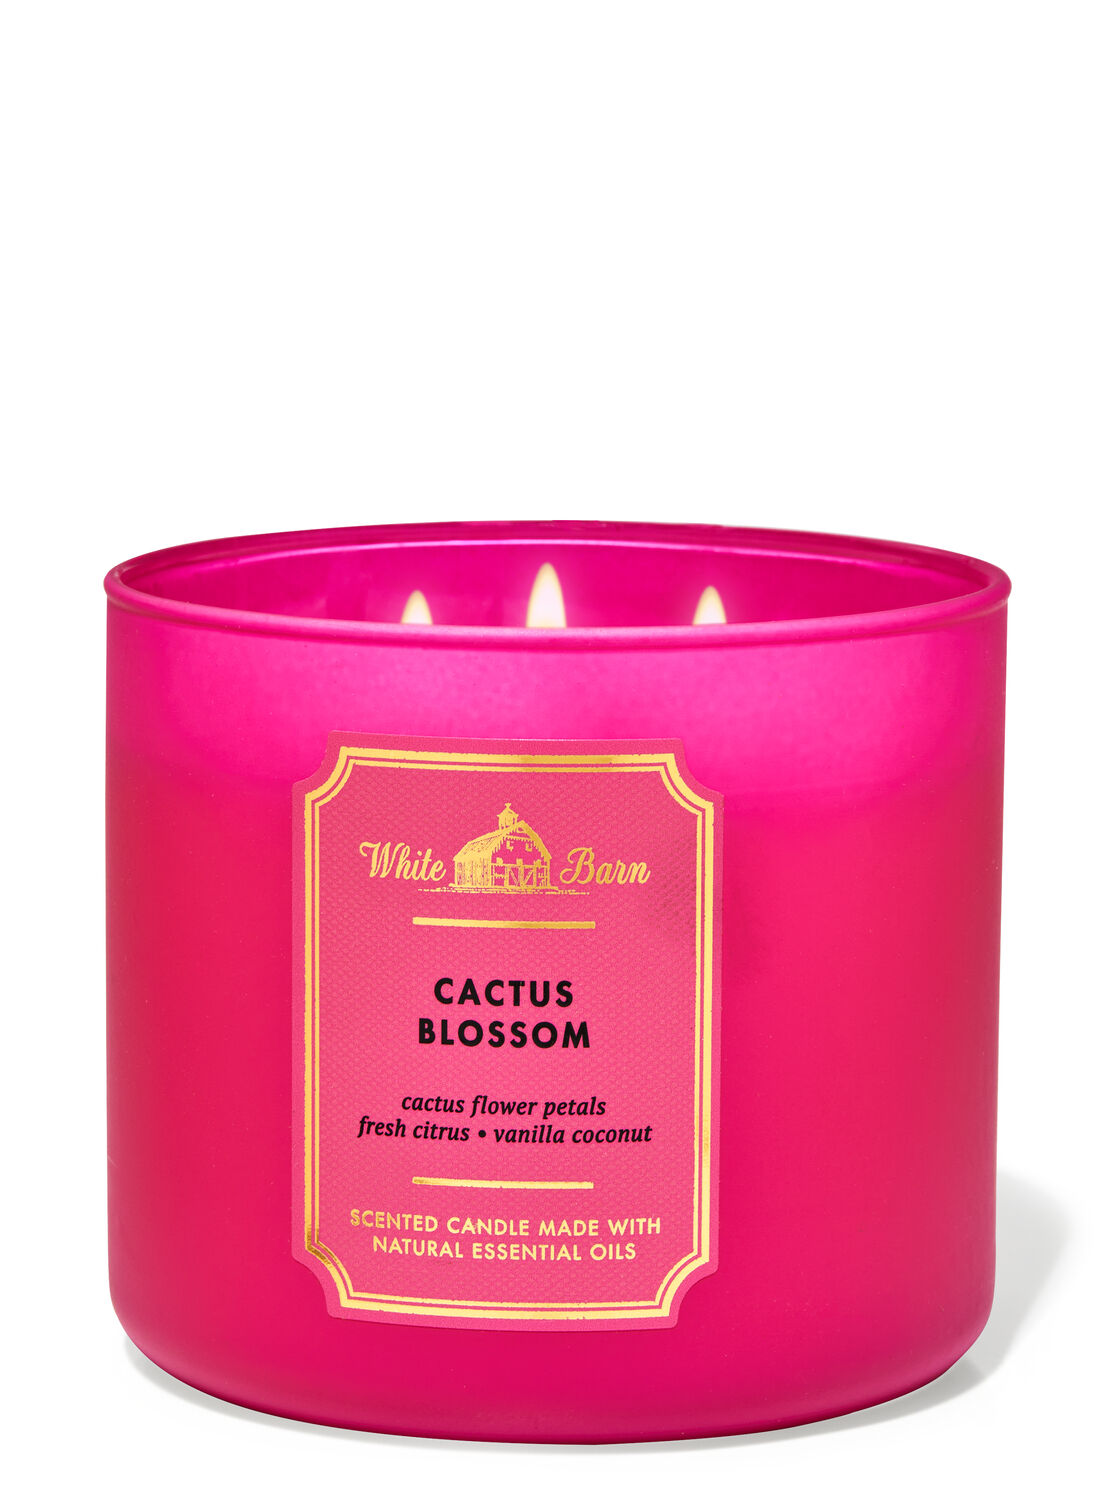 Cactus Blossom 3-Wick Candle - White Barn | Bath & Body Works